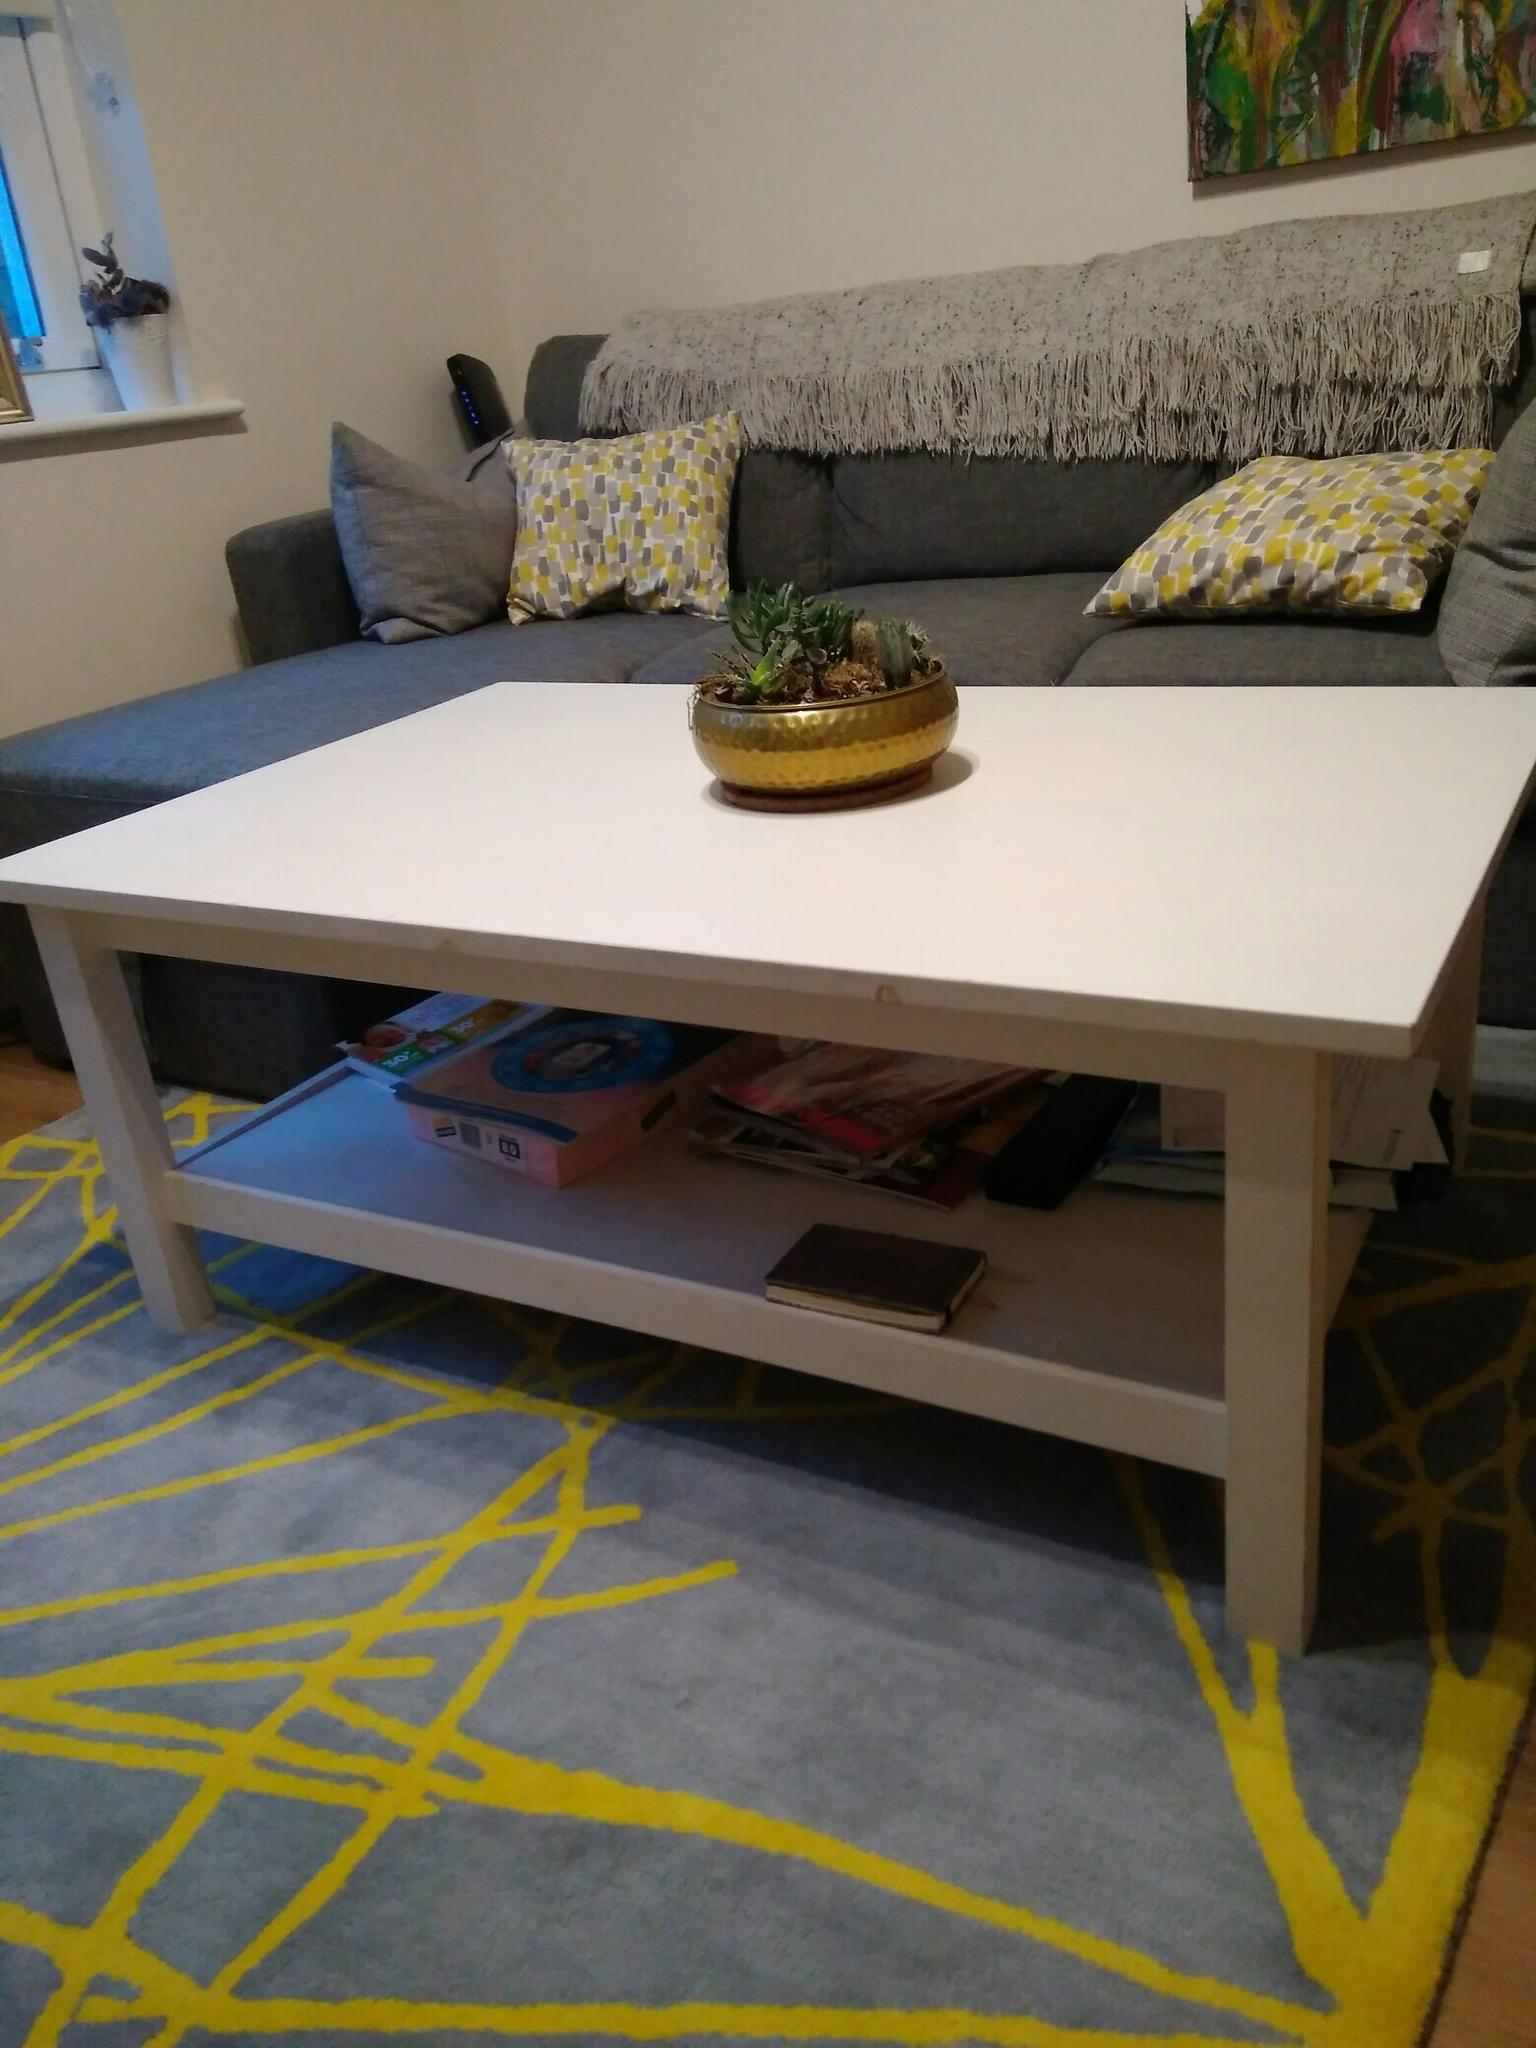 Ikea Hemnes White Coffee Table In Wc1h Camden For 30 00 For Sale